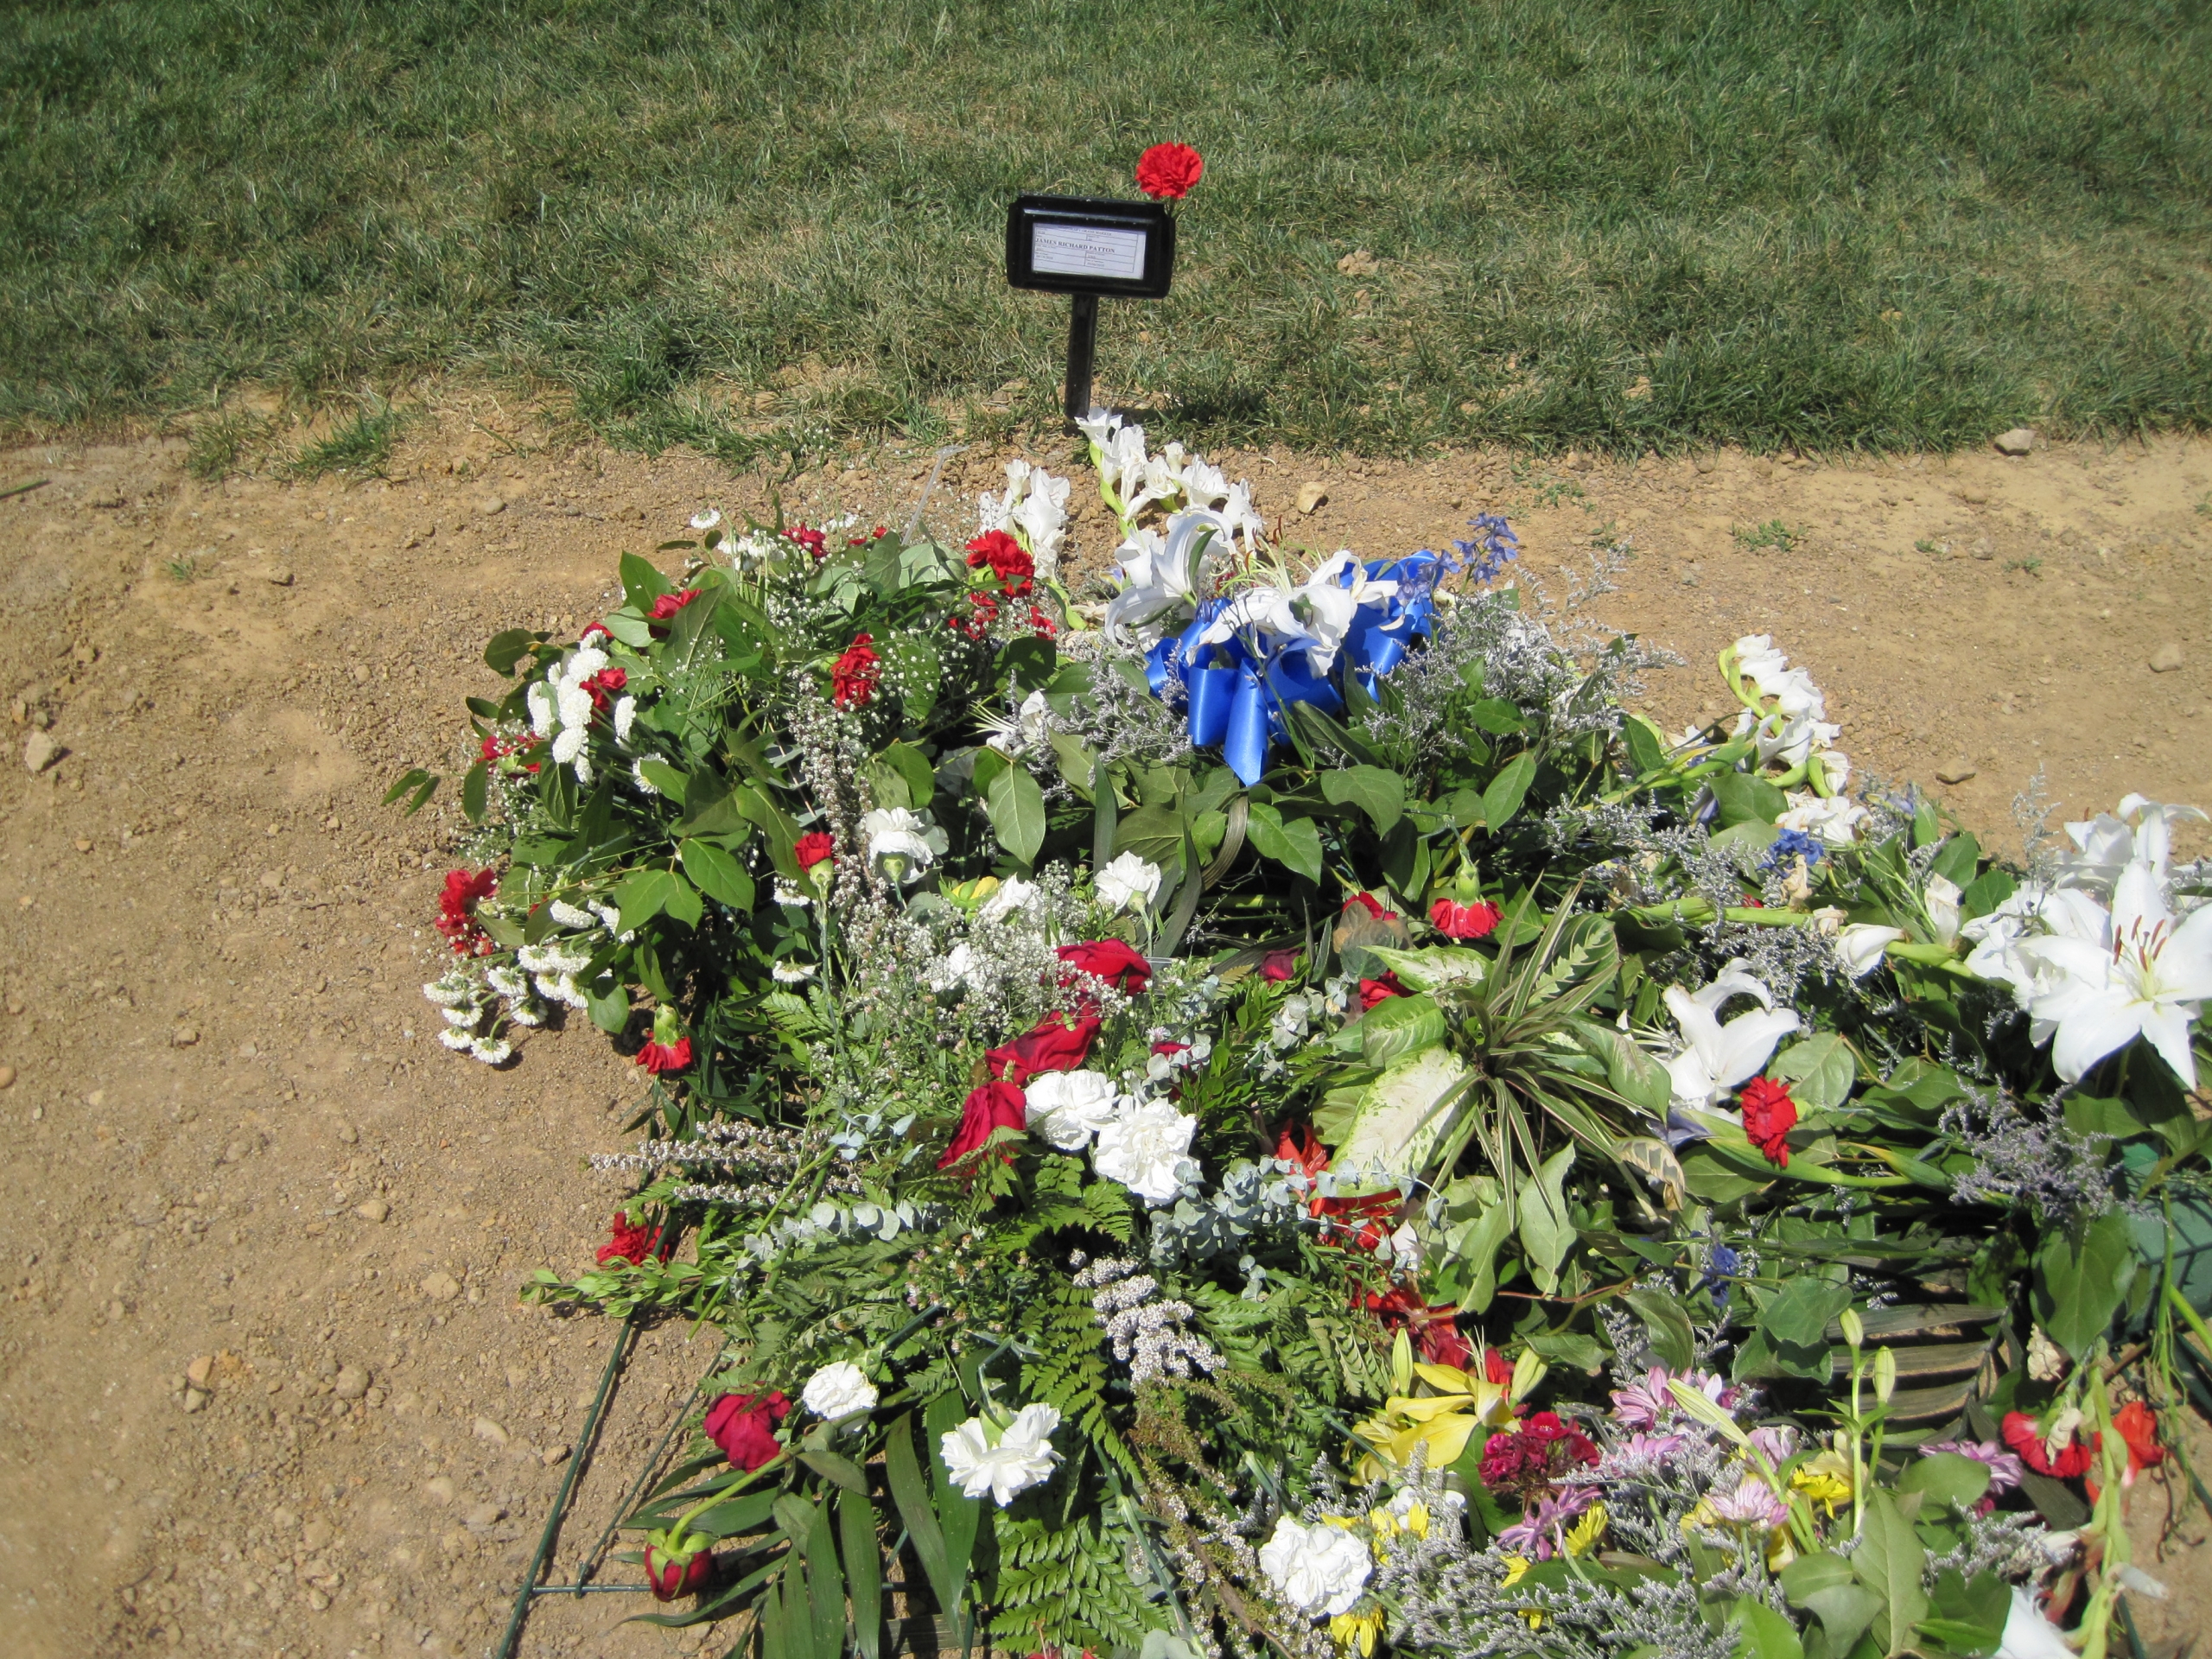 jrpatton-gravesite-photo-by-eileen-horan-may-2010-003